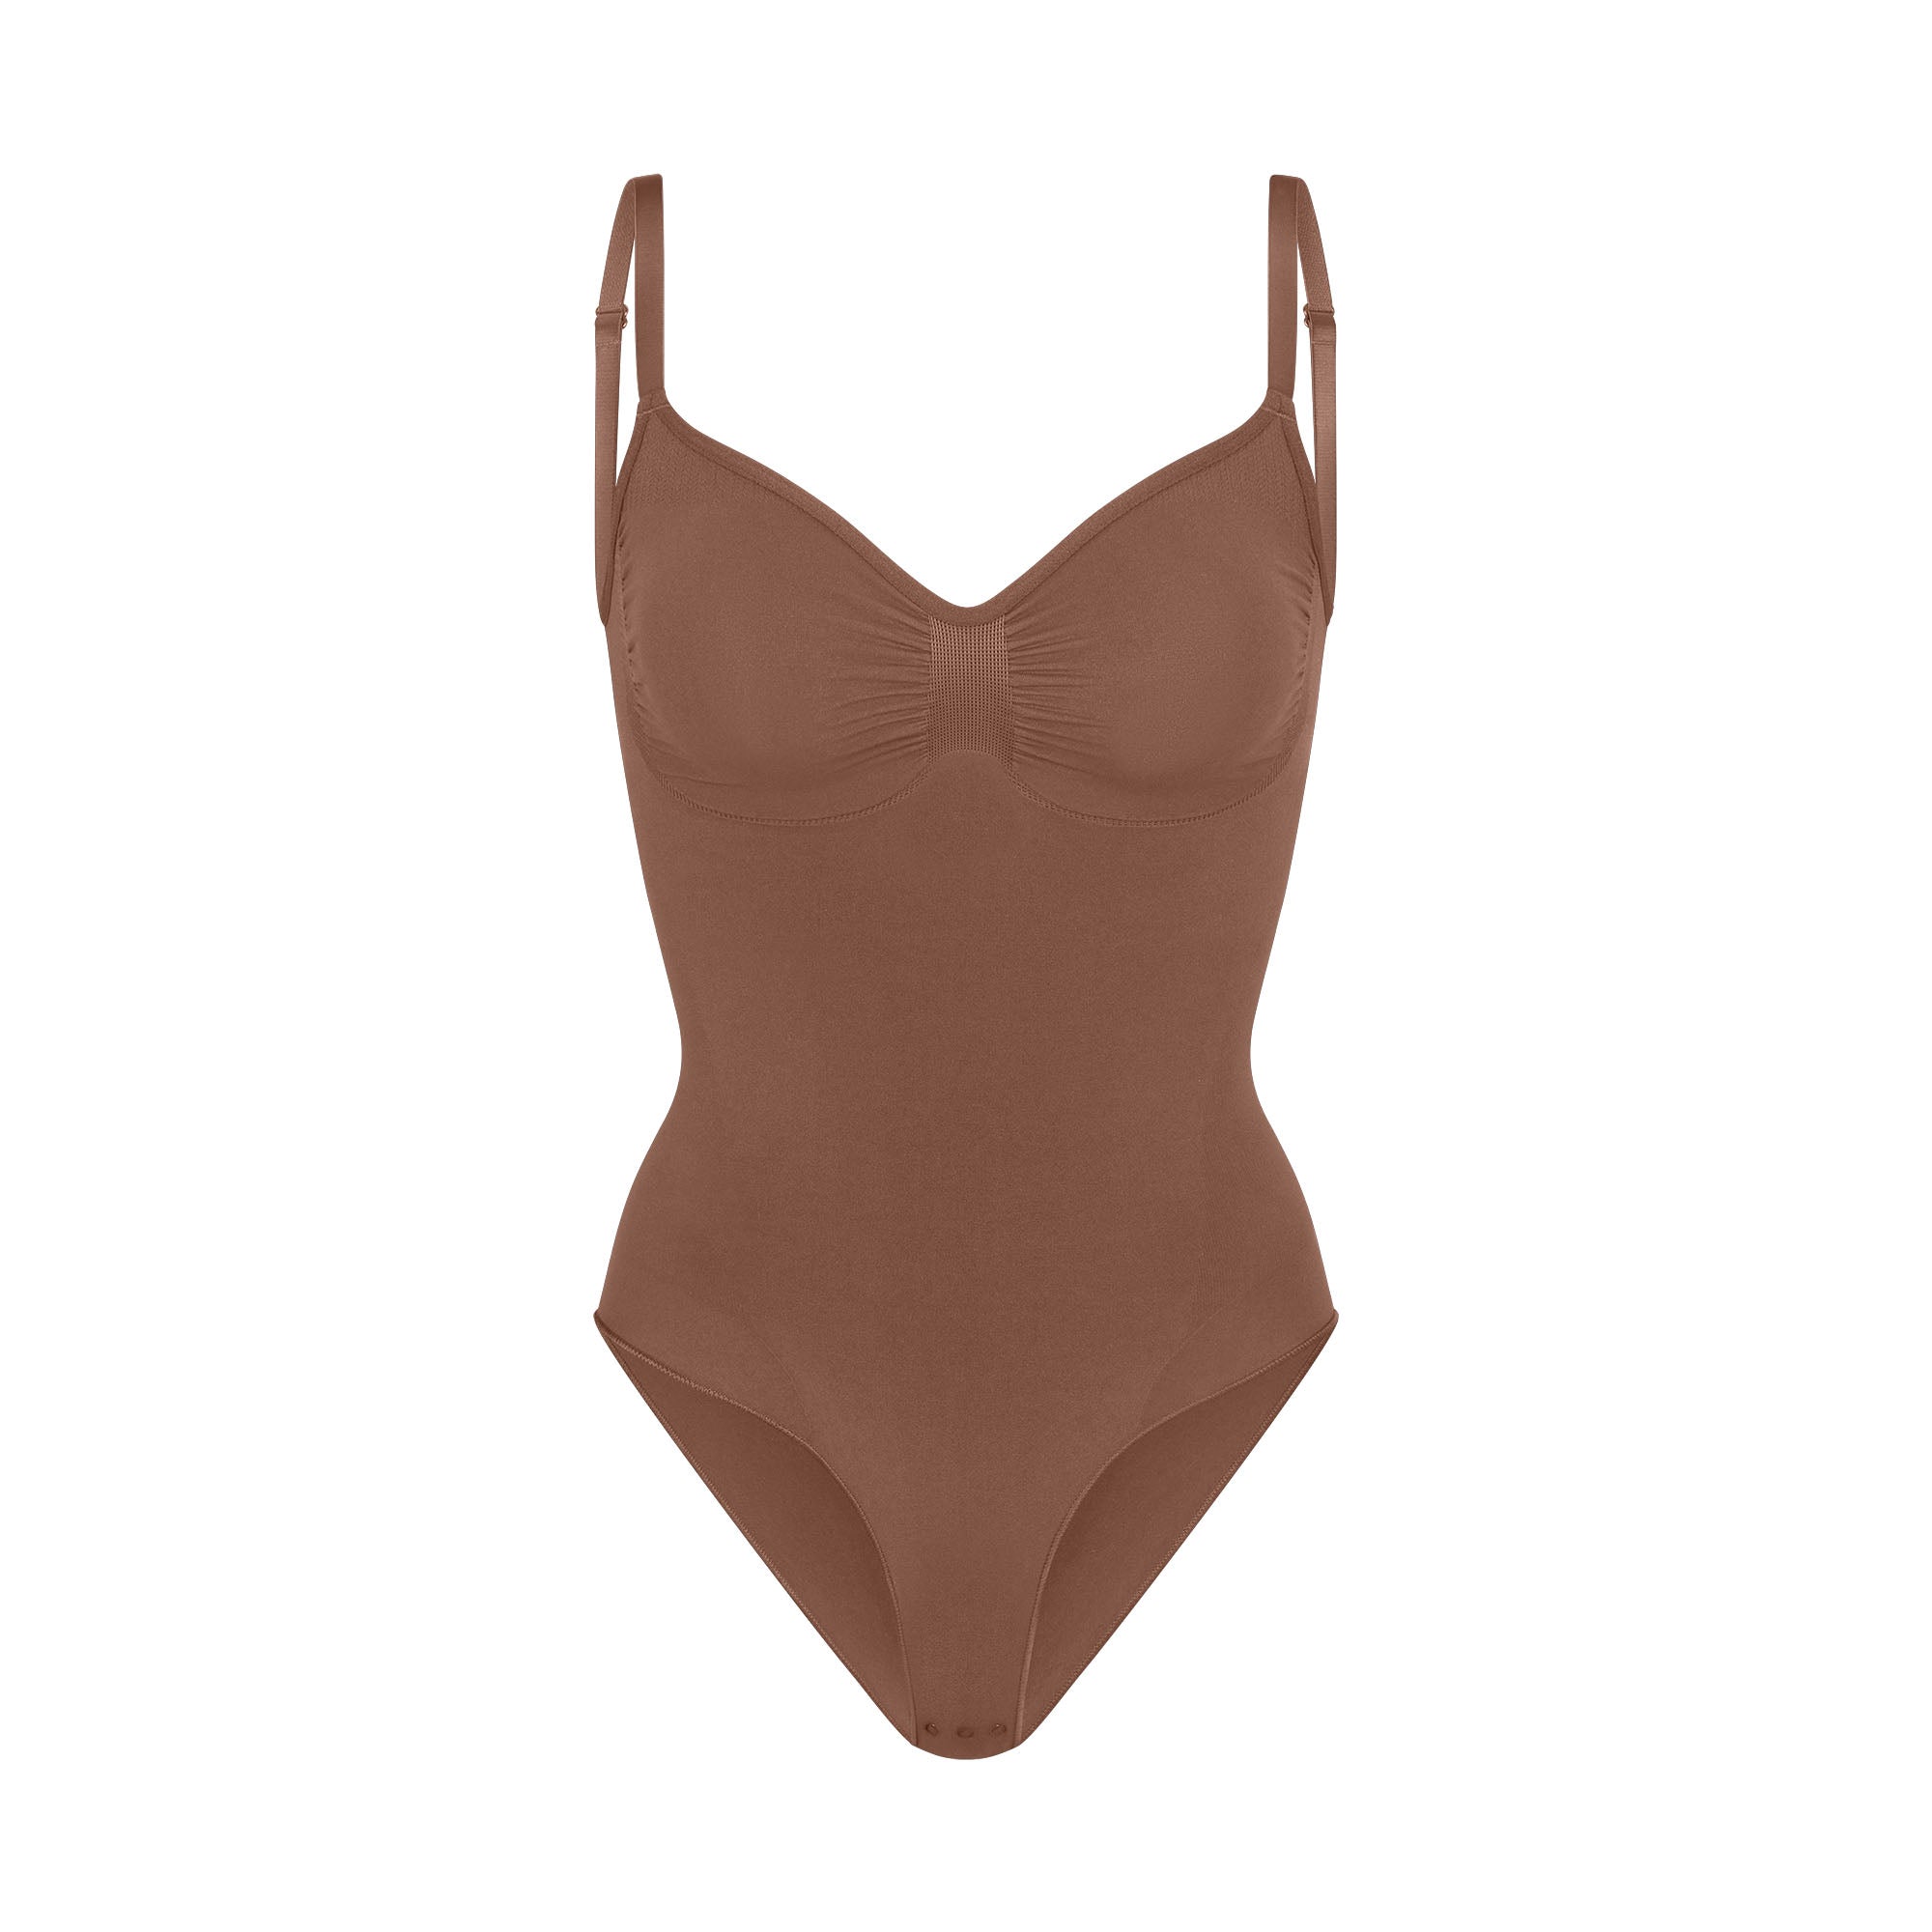 SKIMS sculpting bodysuit brief size S/M ochure new in box - $44 New With  Tags - From Courtney